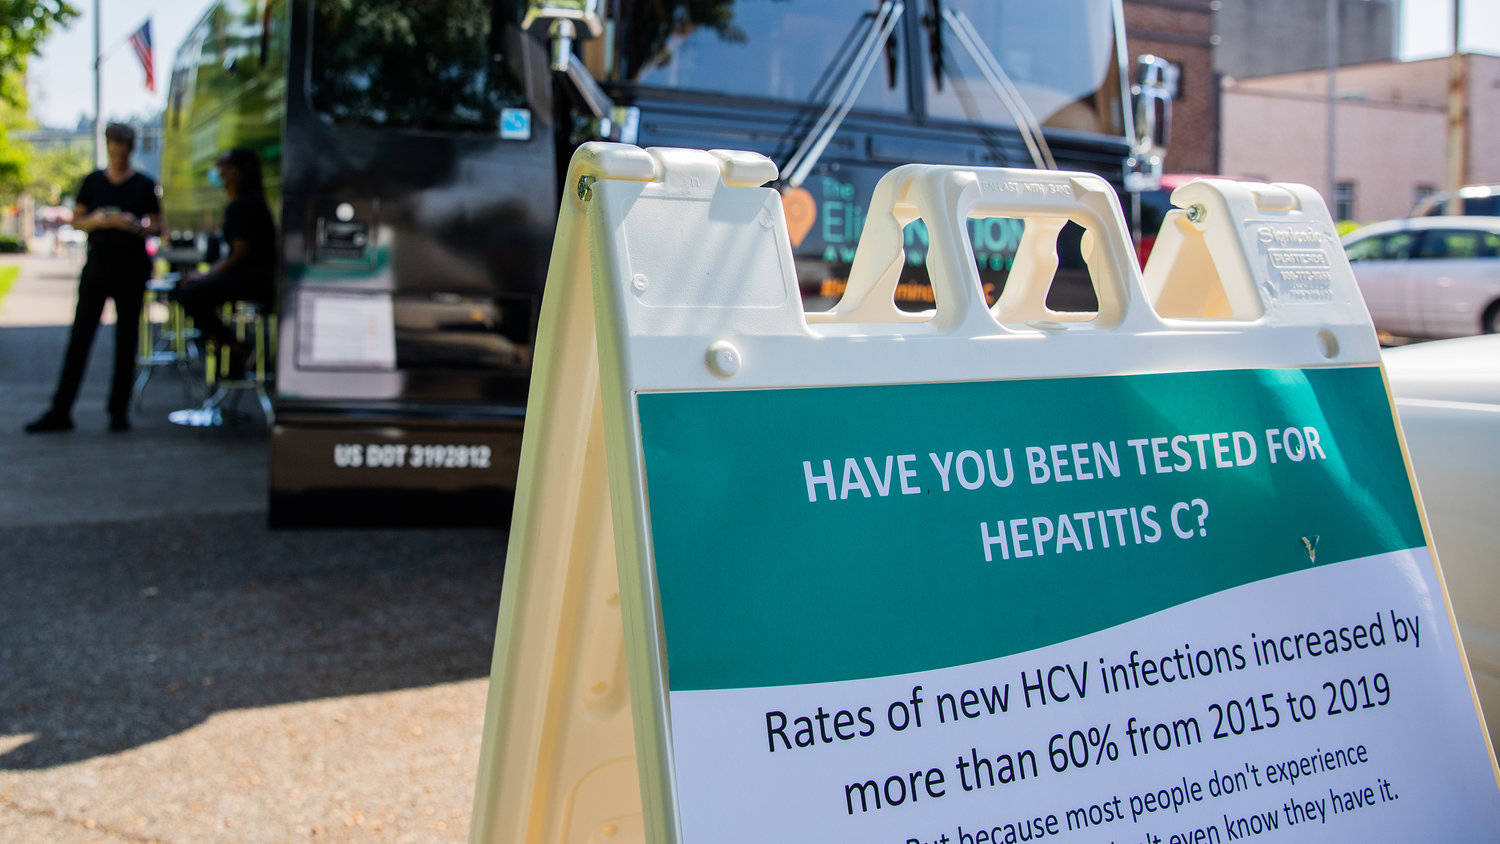 Hepatitis C tests are conducted at George Washington Park in Centralia during an Overdose Awareness event on Wednesday.